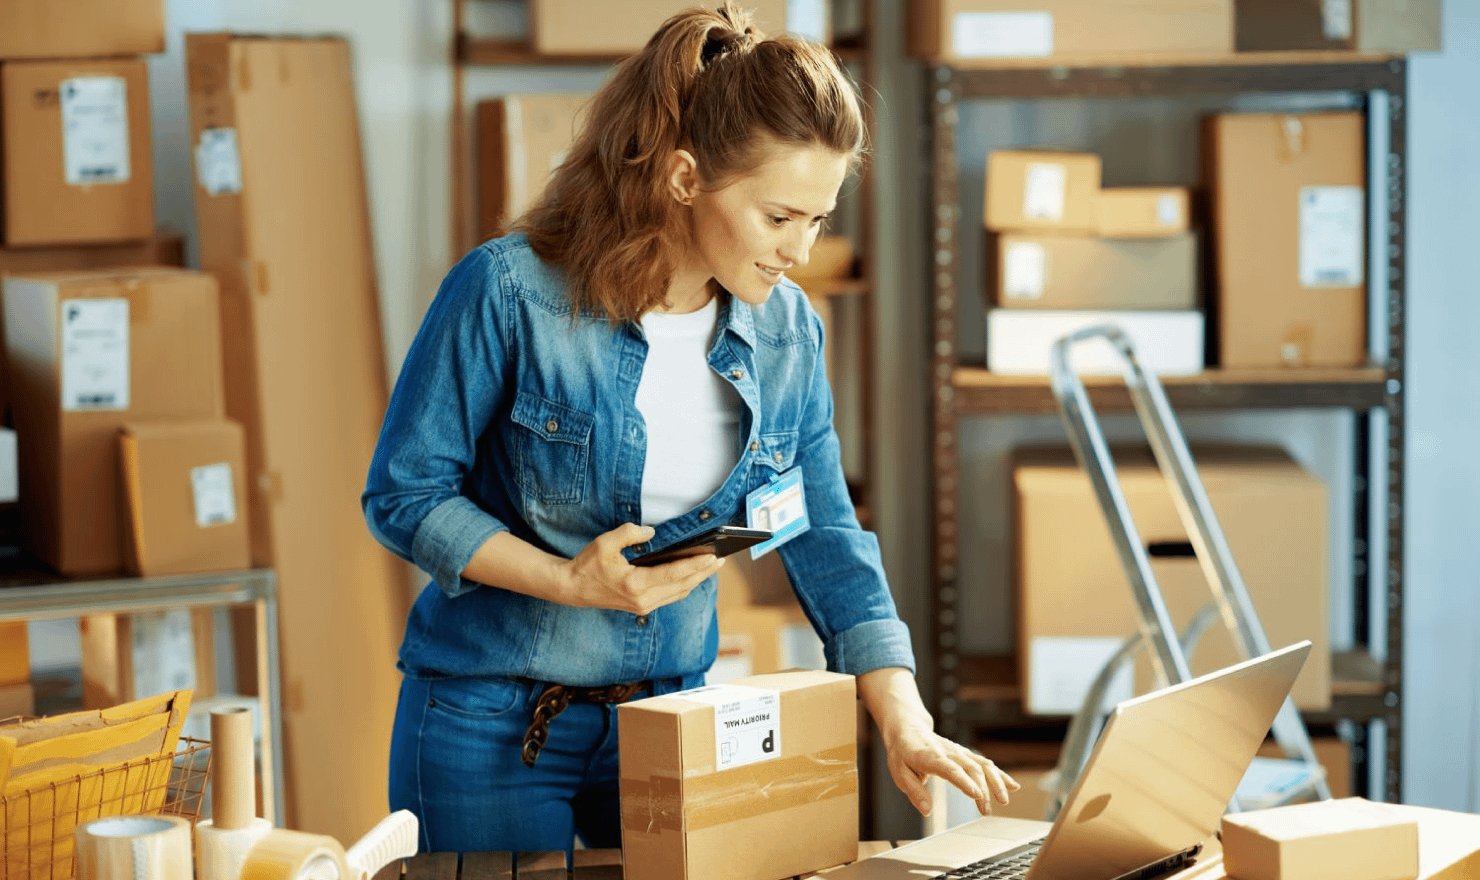 Woman checks laptop while stood in warehouse full of boxes